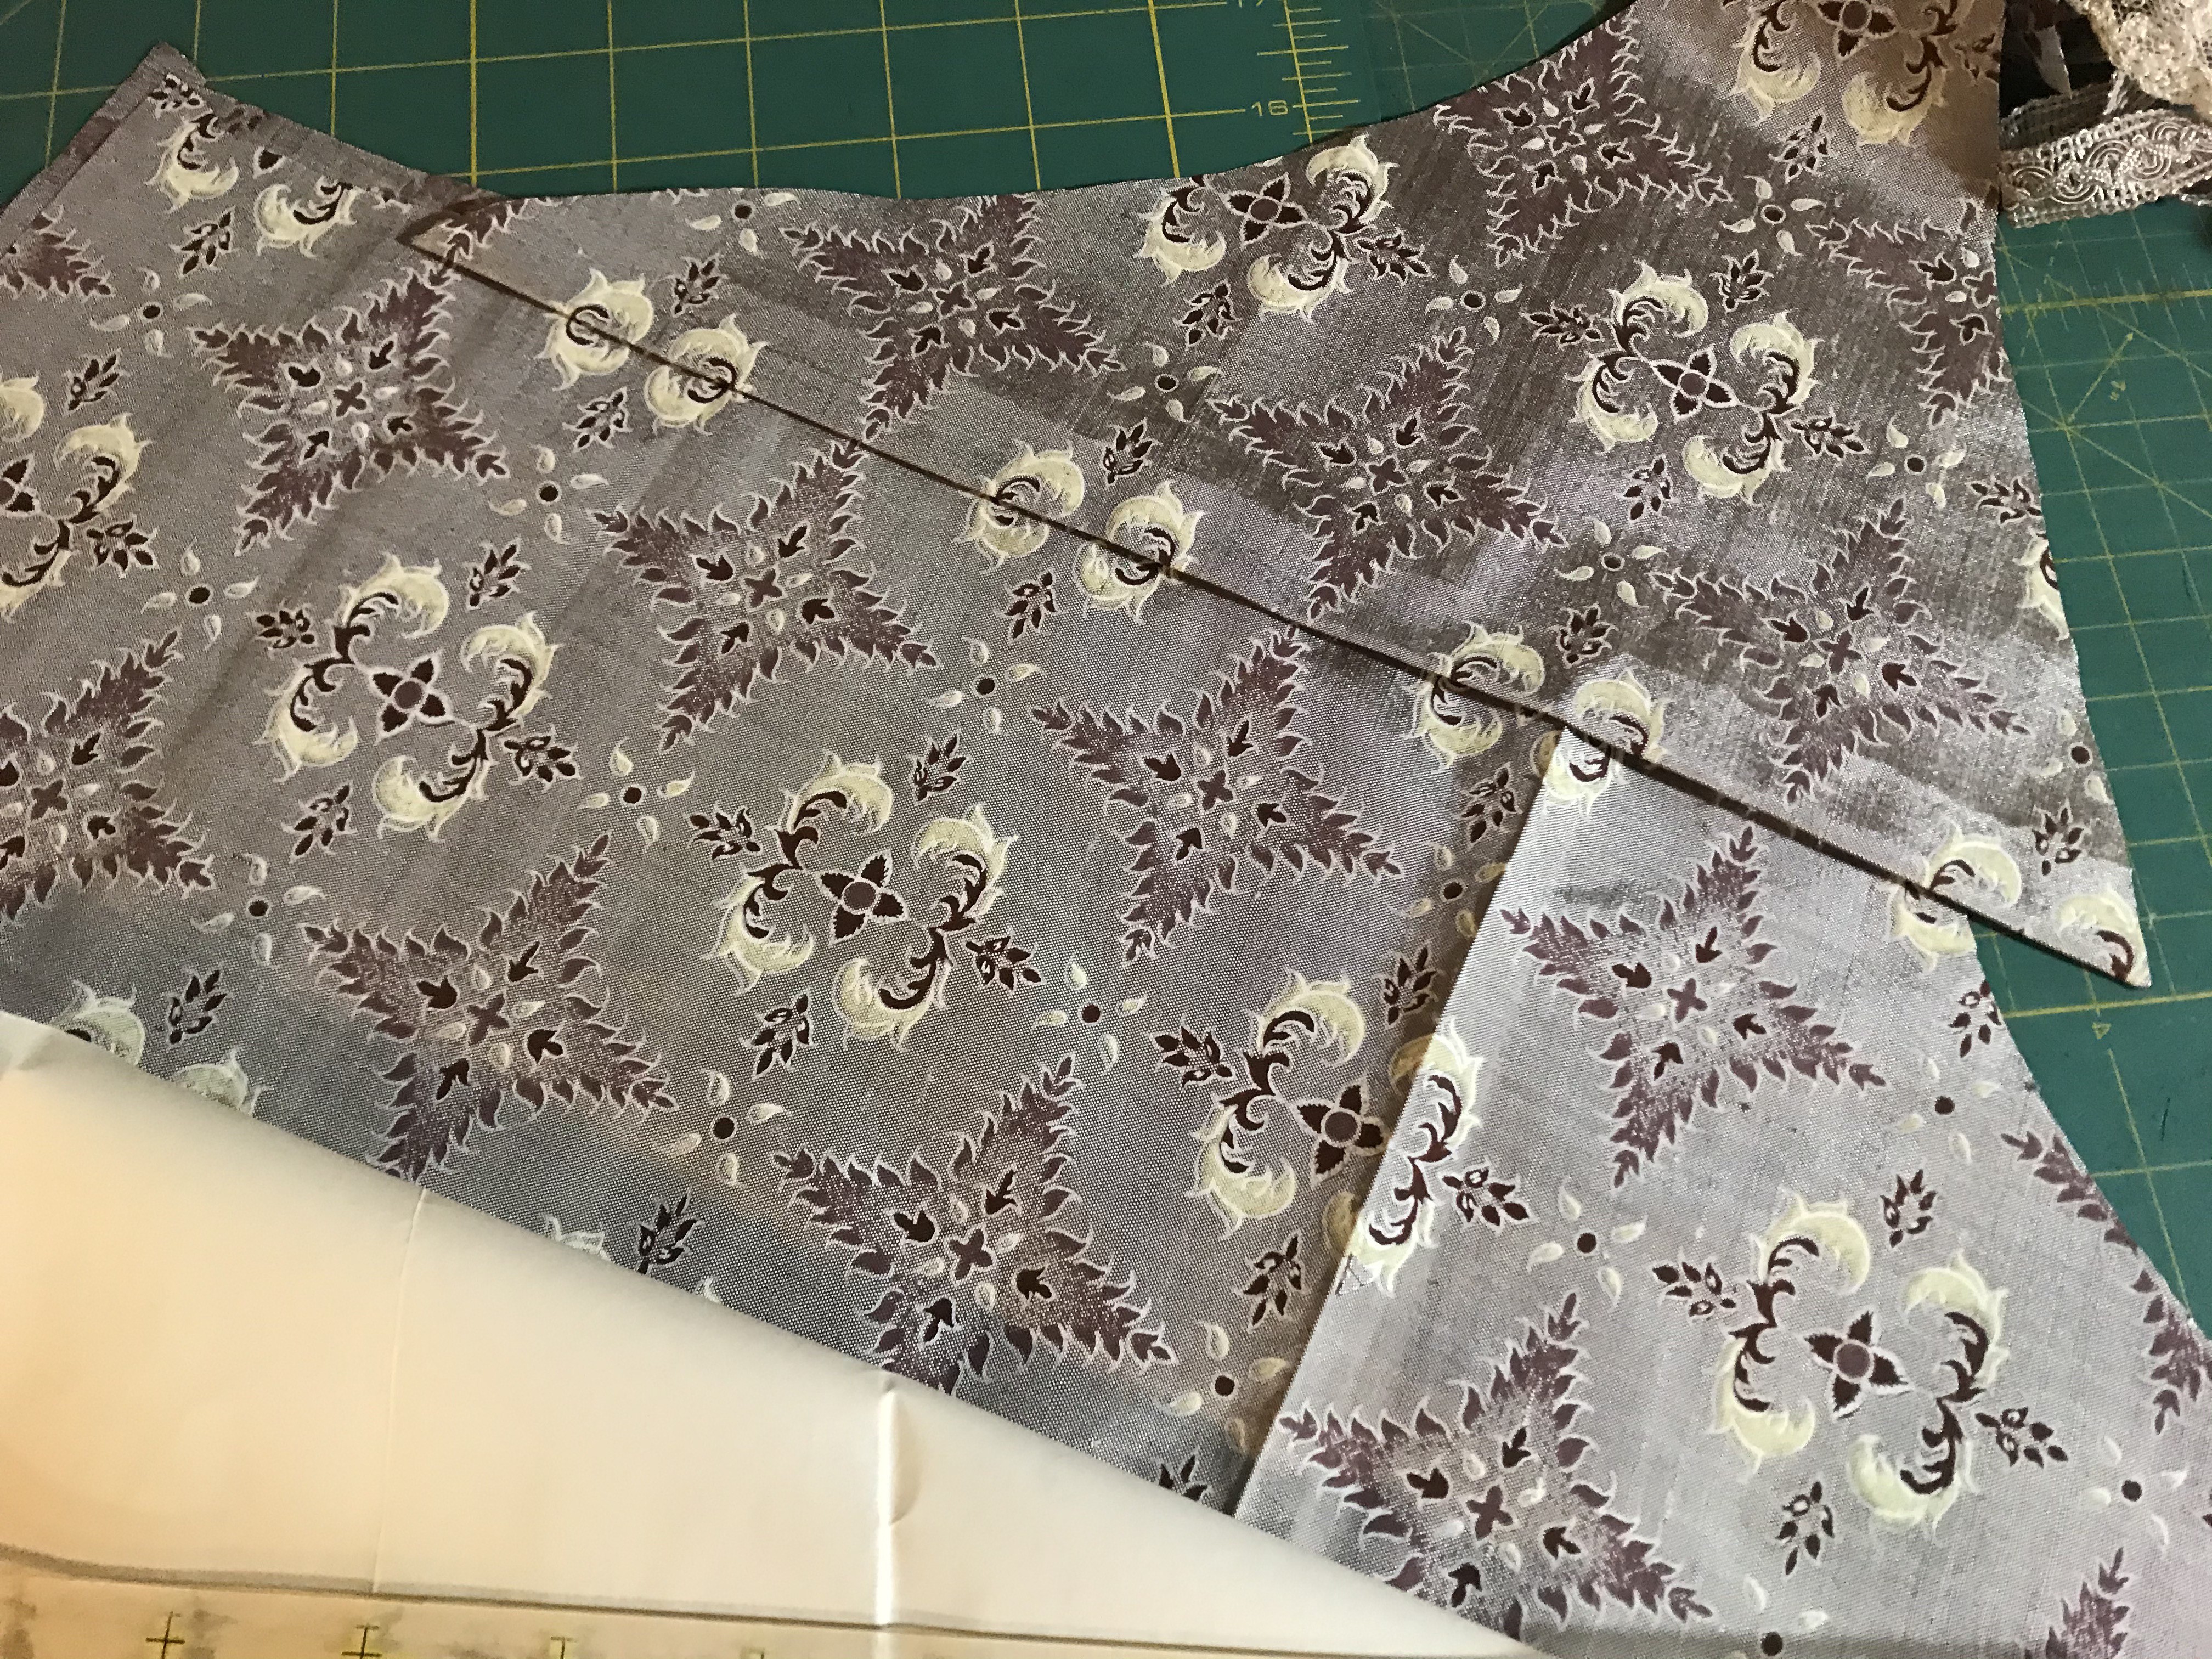 Matching the fabric pattern for piecing